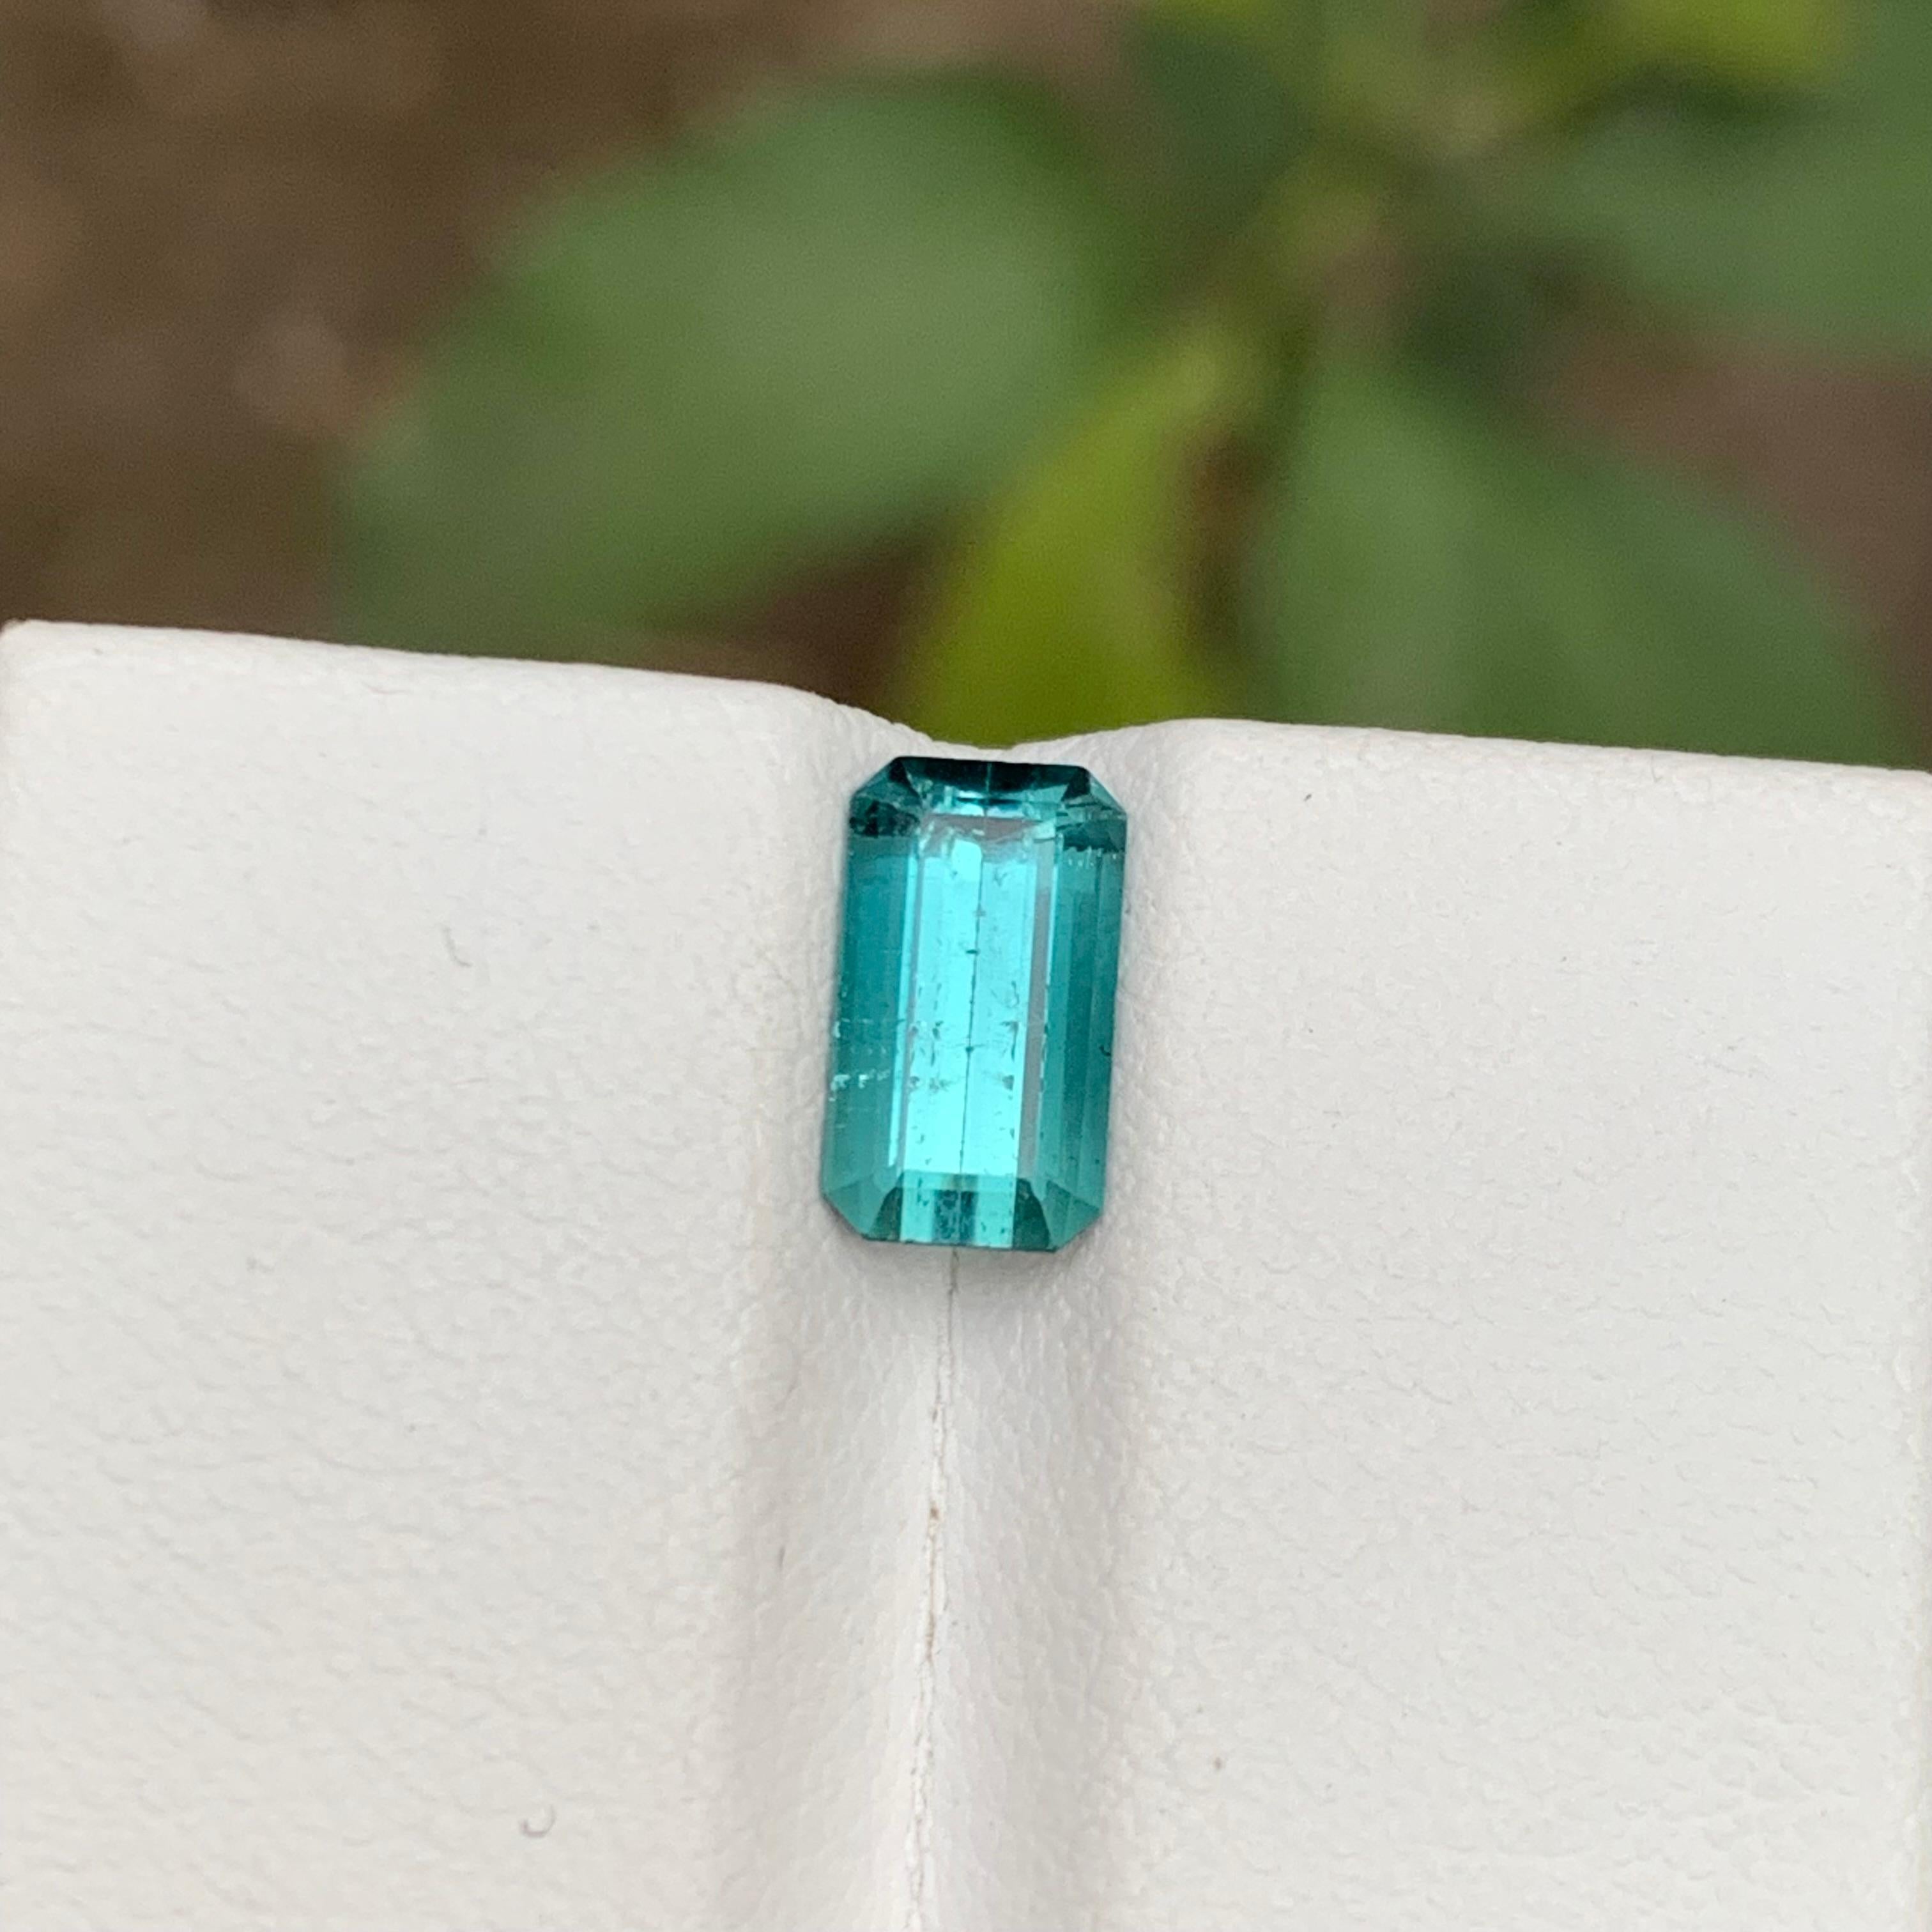 Rare Blue Natural Tourmaline Gemstone, 1.60 Ct Emerald Cut for Ring/Jewelry Set For Sale 4